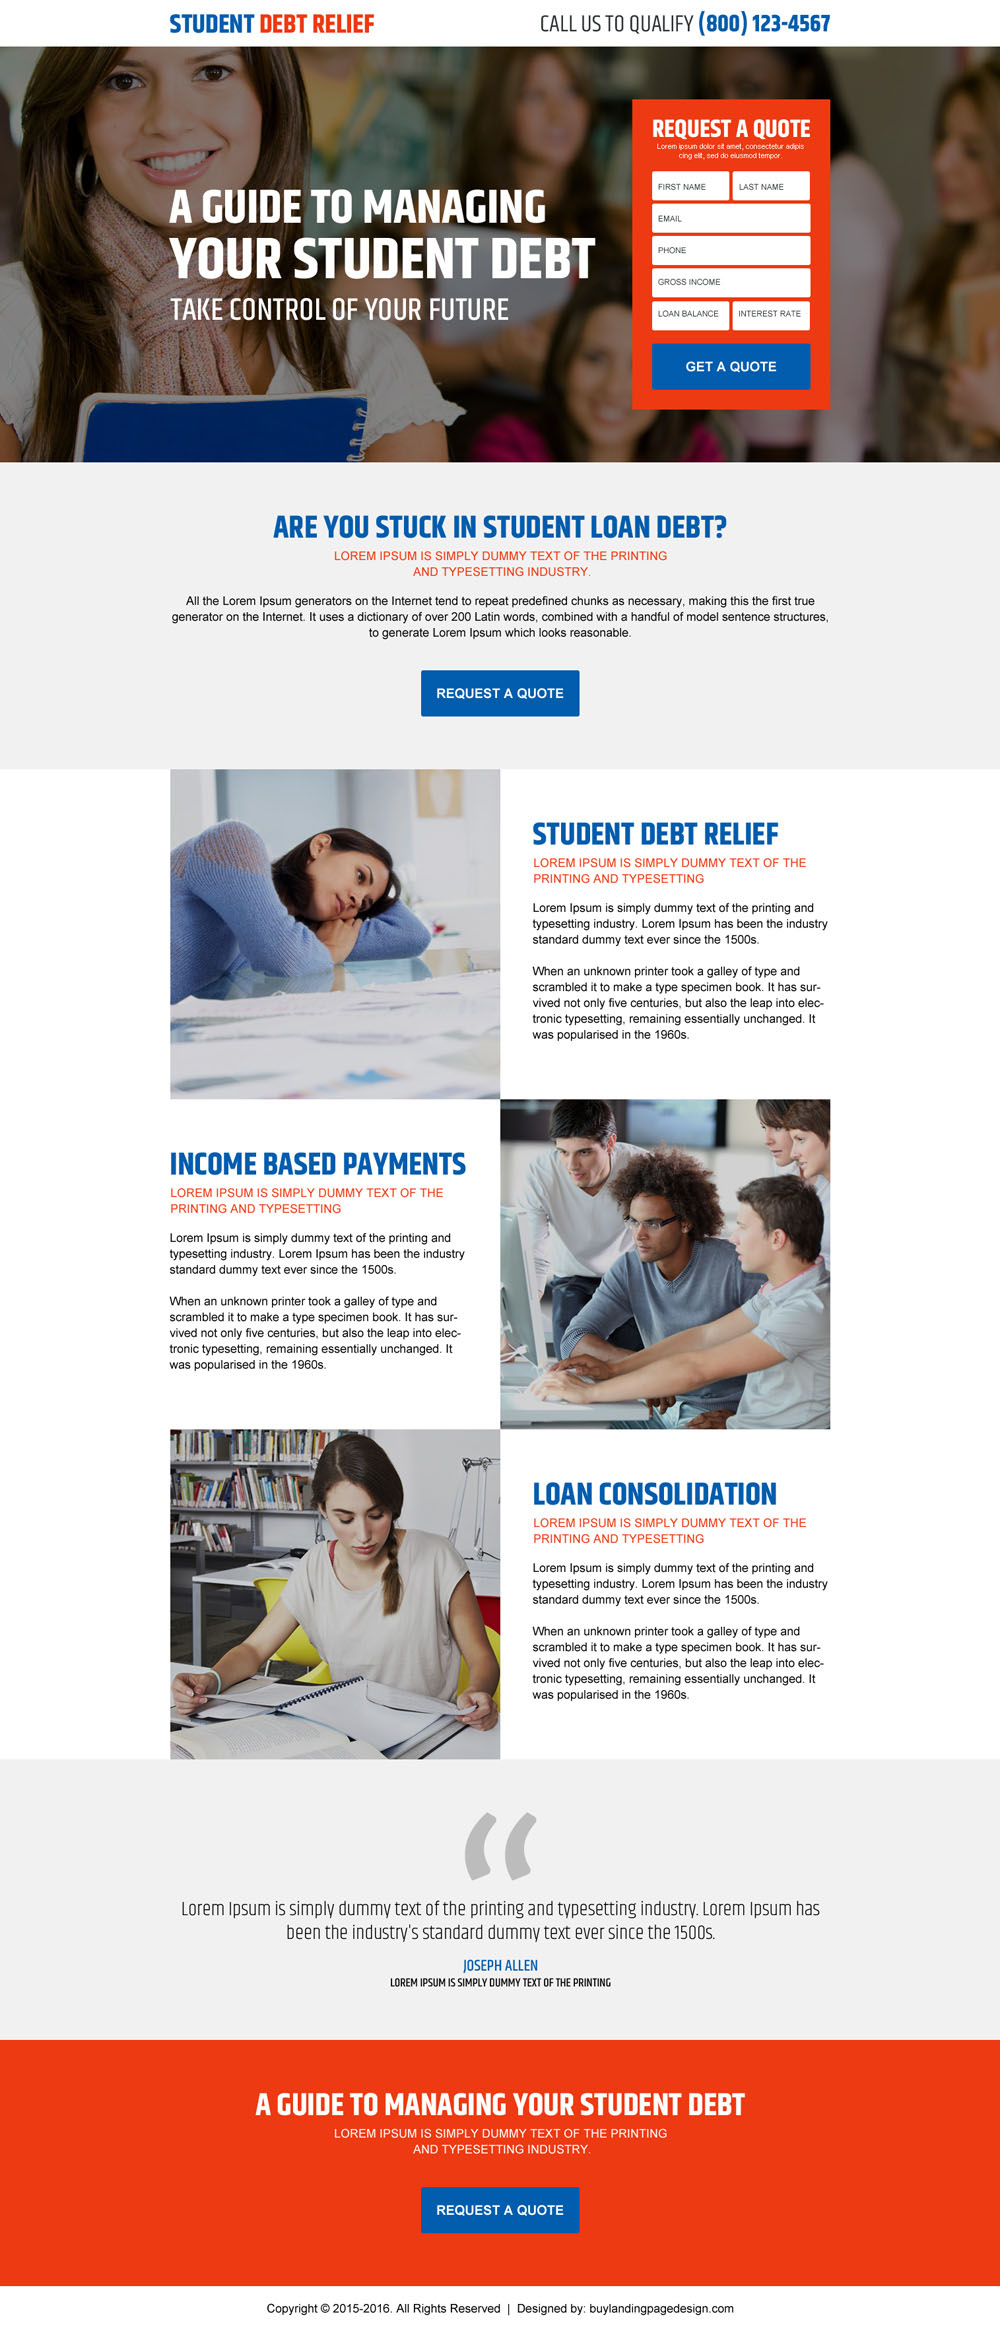 student-debt-relief-guide-free-quote-lead-gen-landing-page-design-045